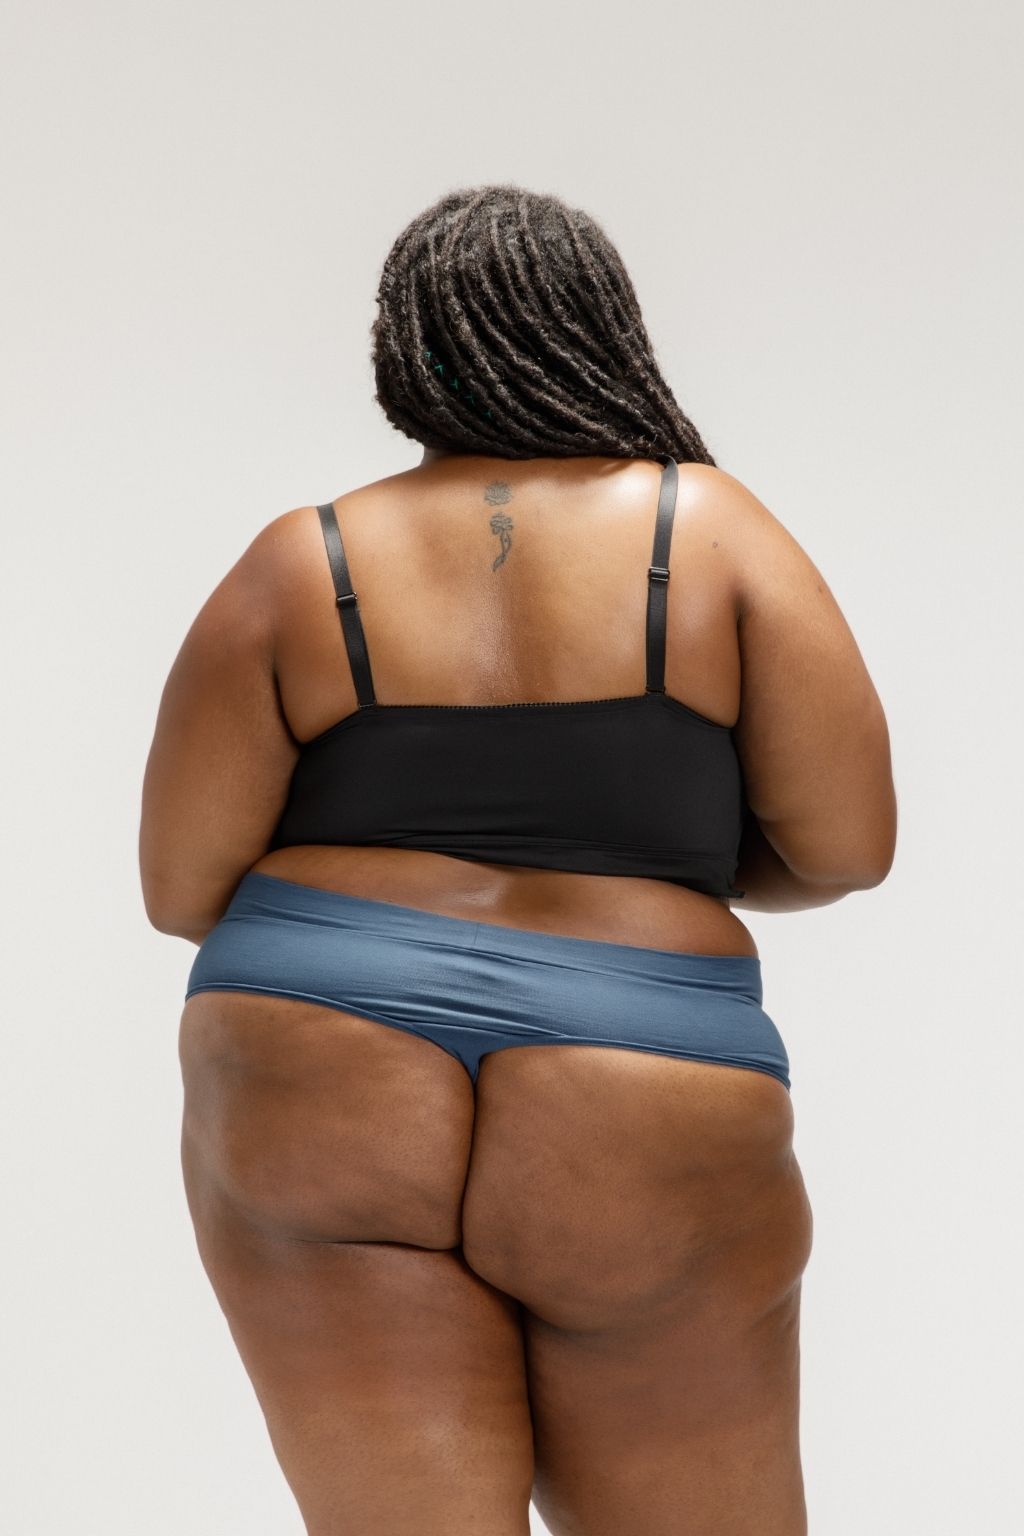 deepak mj recommends Thick Black Girls In Thongs